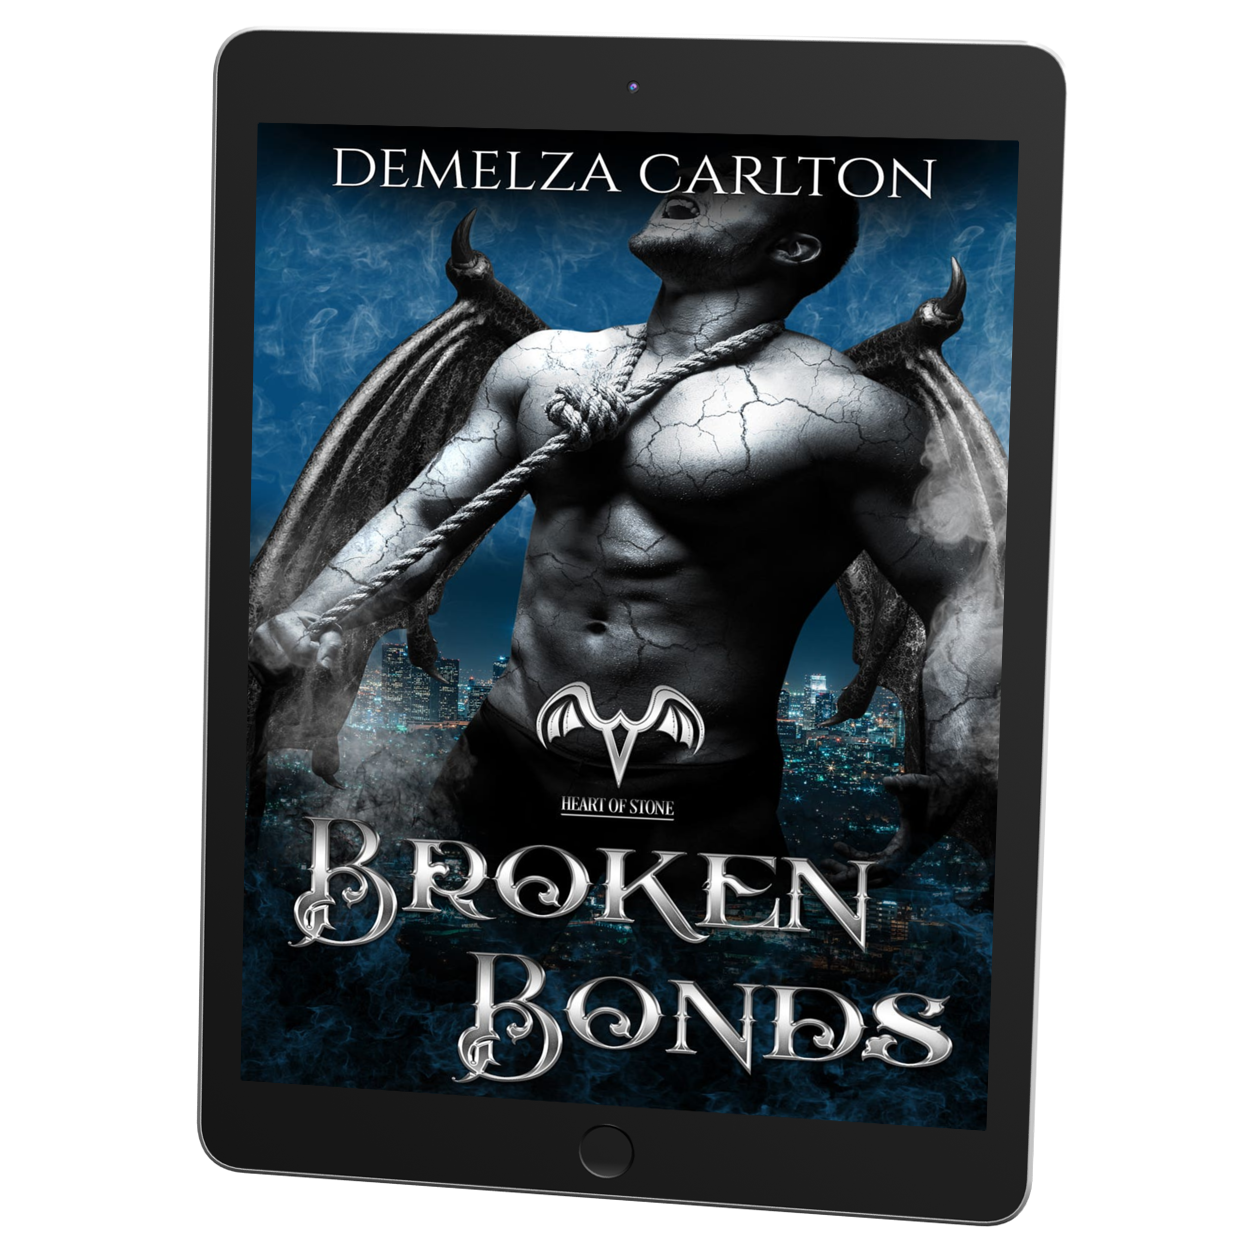 Broken Bonds: A Paranormal Protector Tale Book 2 in the Heart of Stone series by USA Today Bestselling Author Demelza Carlton ebook